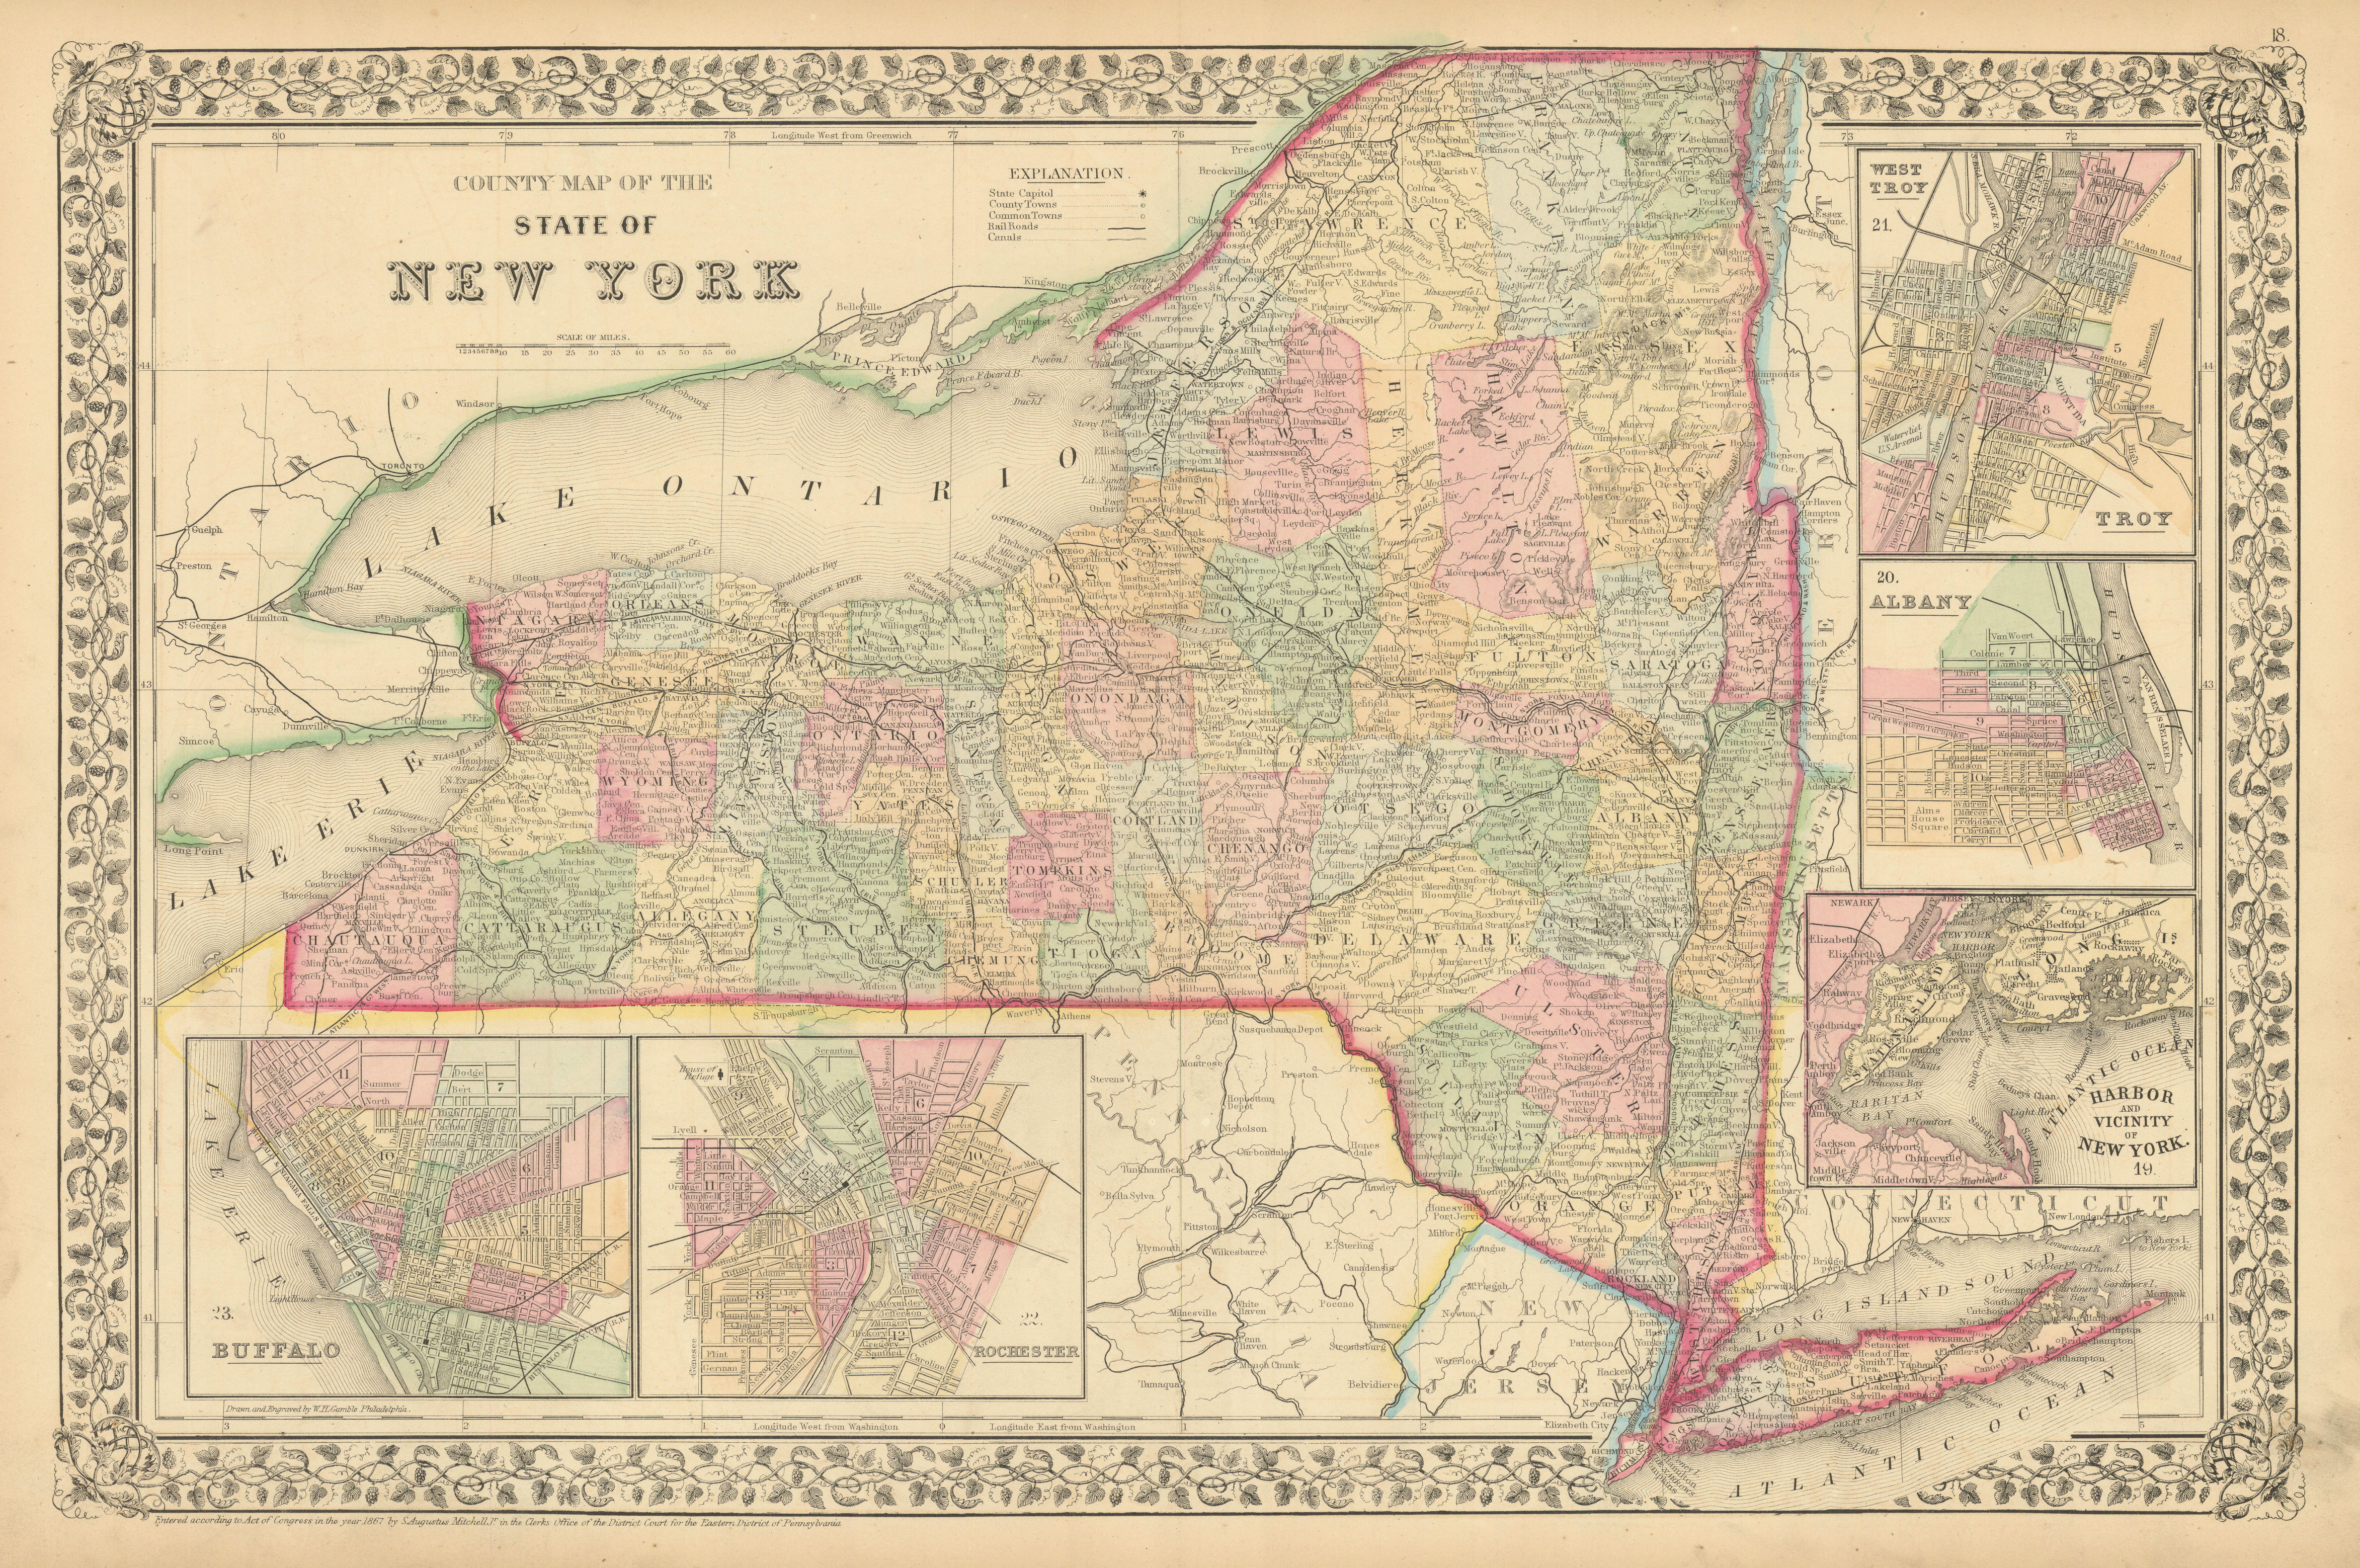 County map of the State of New York. Albany Troy Rochester Buffalo MITCHELL 1869